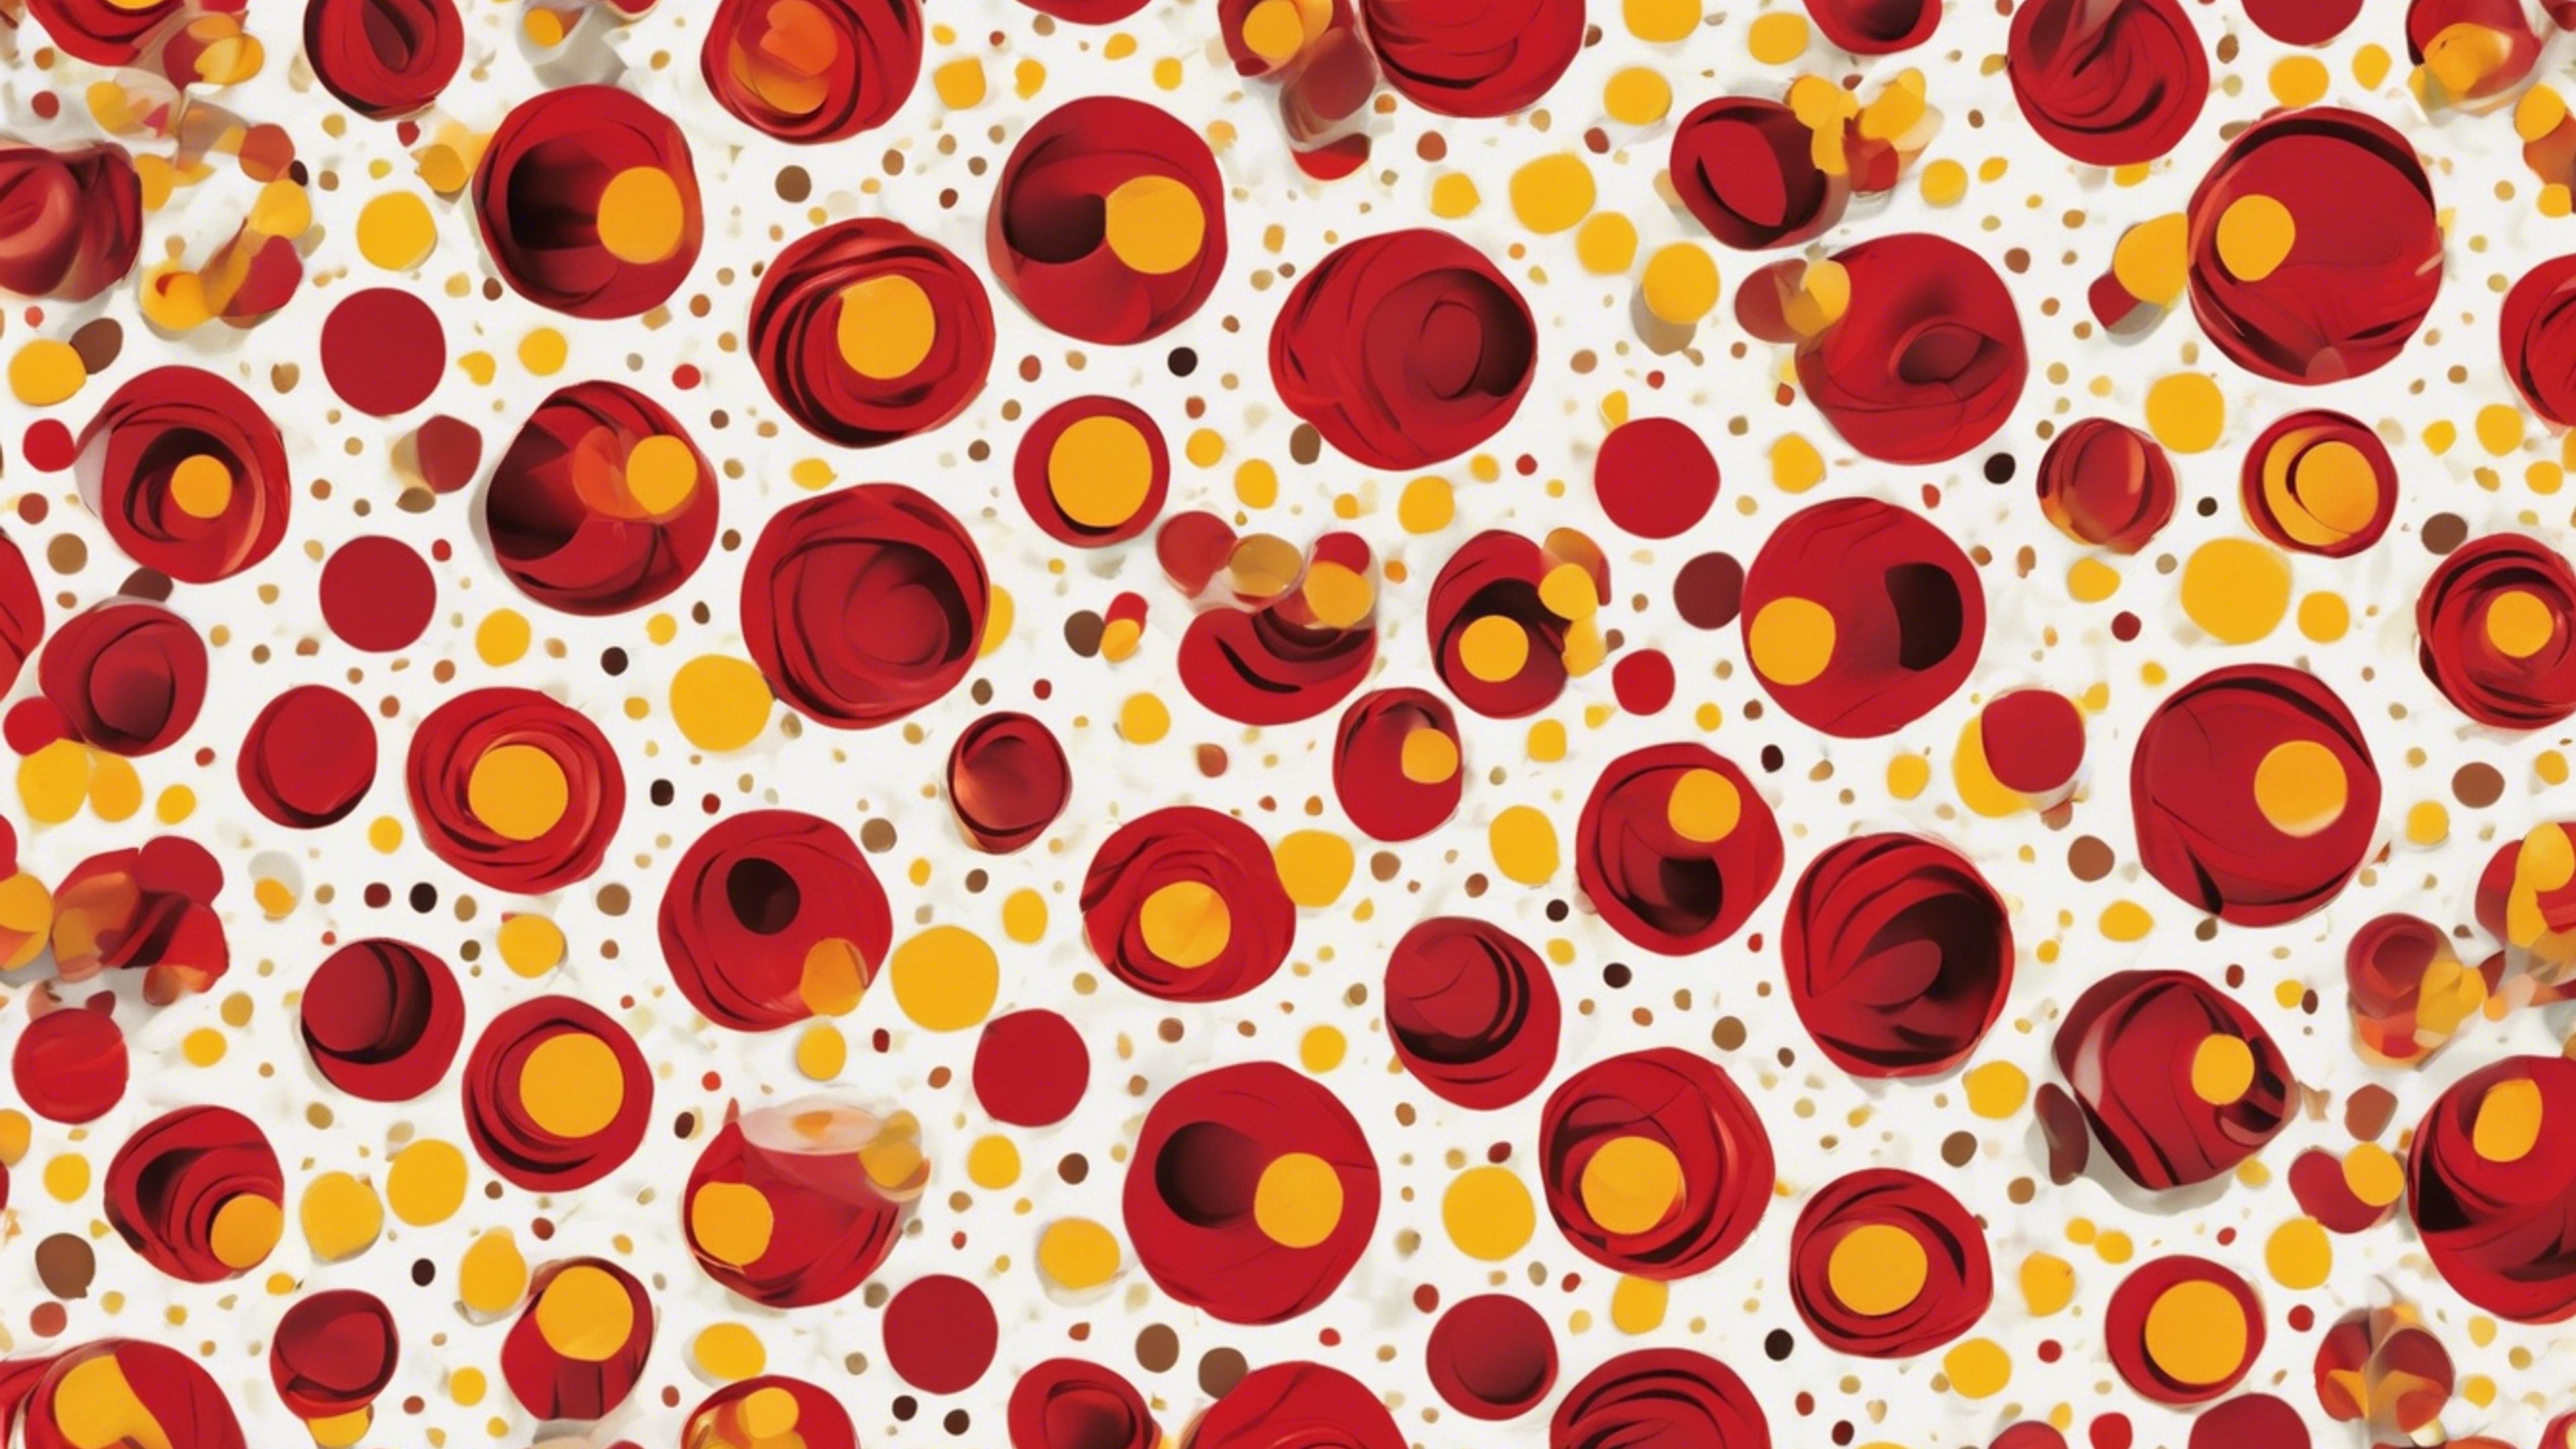 Bold red and yellow polka dots twisted in a seamless whirling pattern.壁紙[0fc99596d75a46c3b08a]